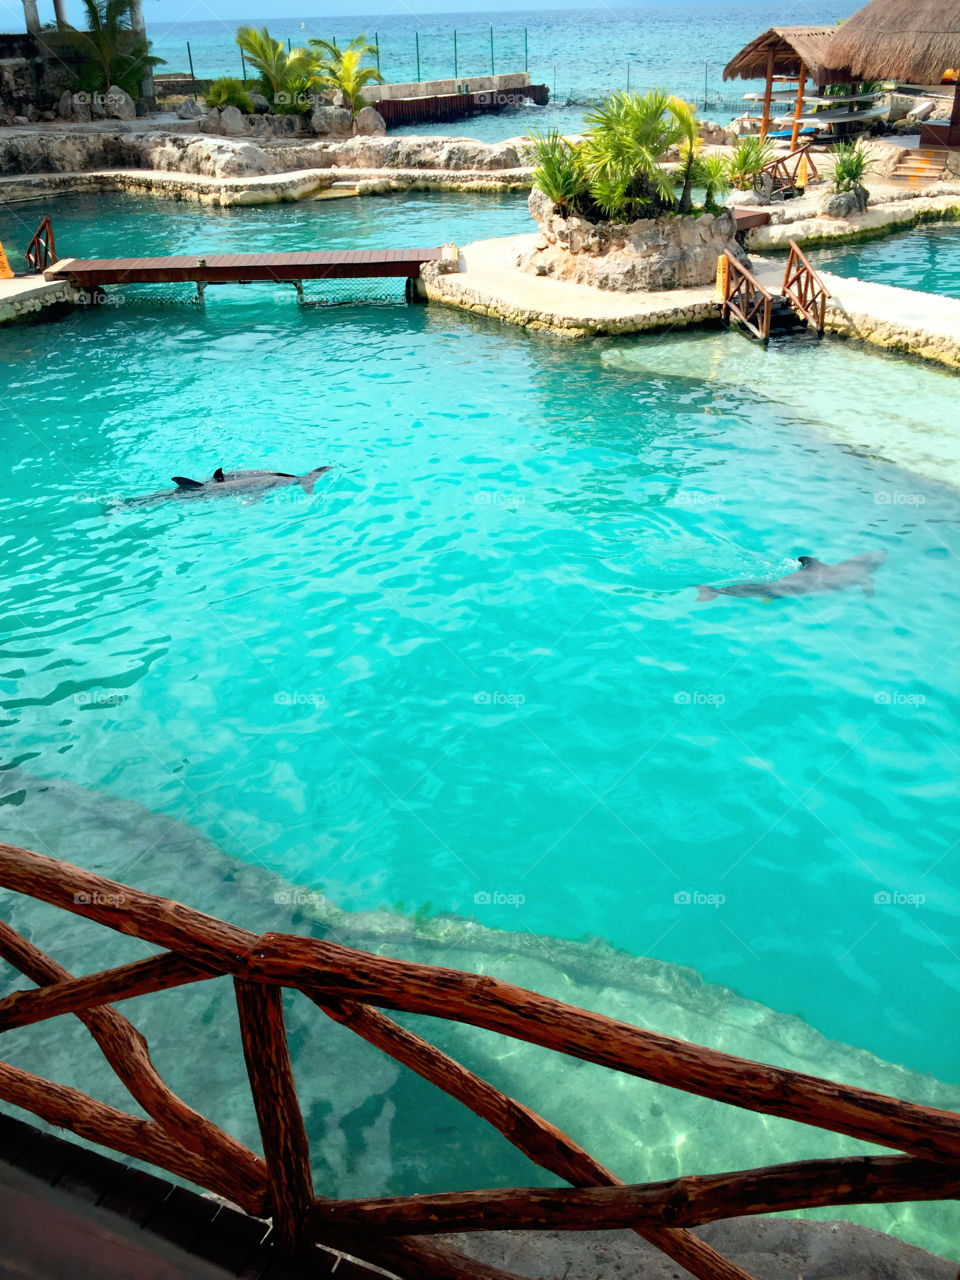 Dolphins in Mexico